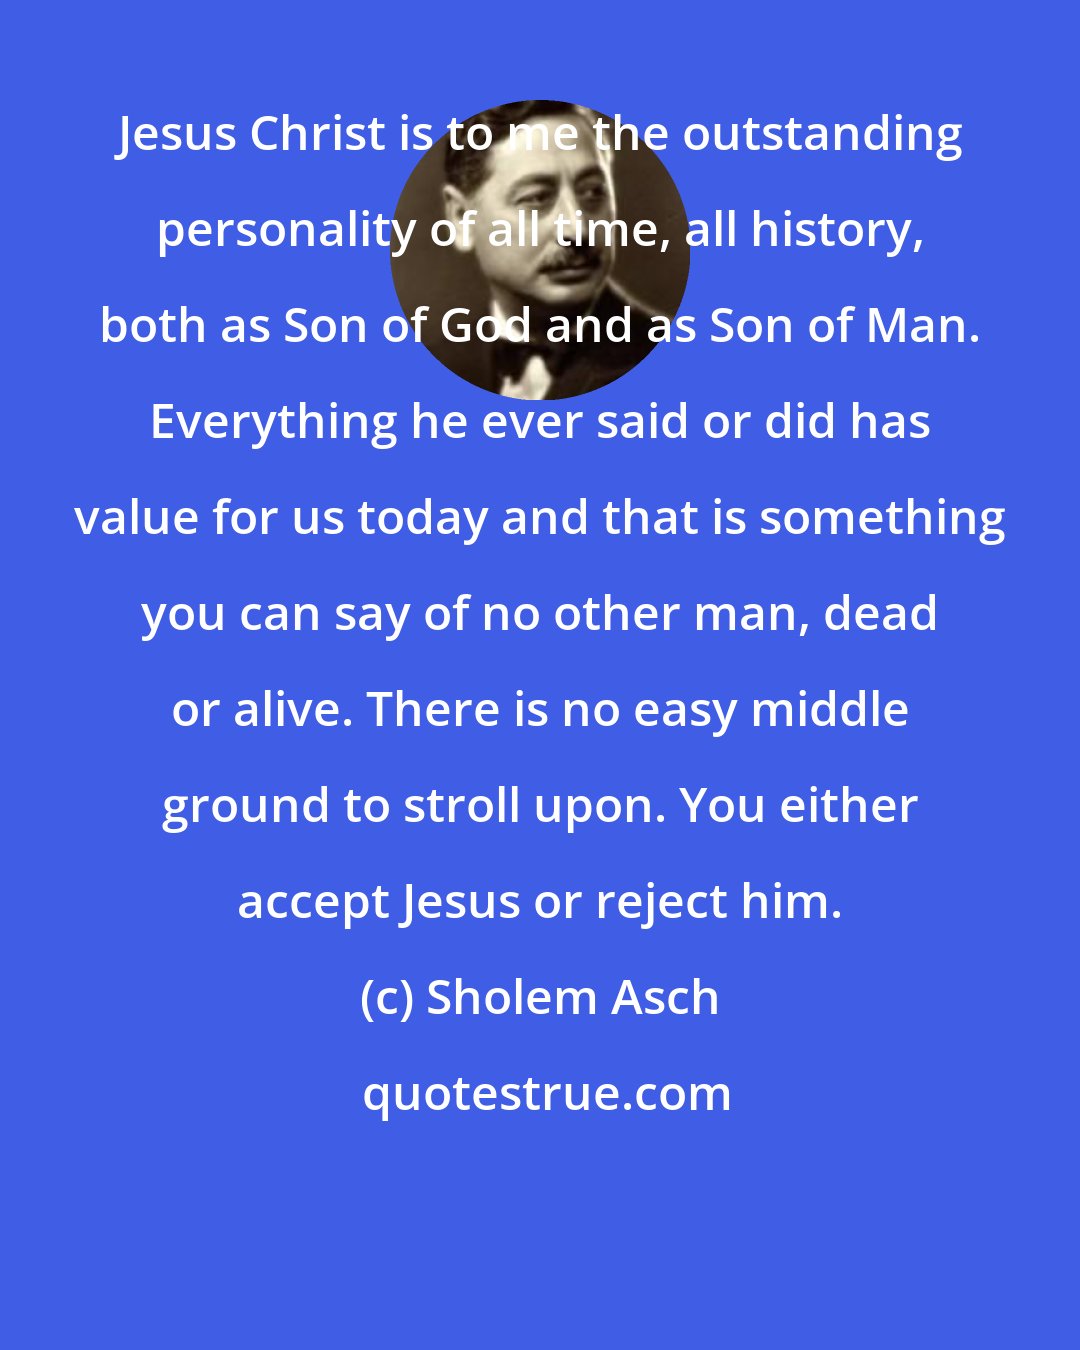 Sholem Asch: Jesus Christ is to me the outstanding personality of all time, all history, both as Son of God and as Son of Man. Everything he ever said or did has value for us today and that is something you can say of no other man, dead or alive. There is no easy middle ground to stroll upon. You either accept Jesus or reject him.